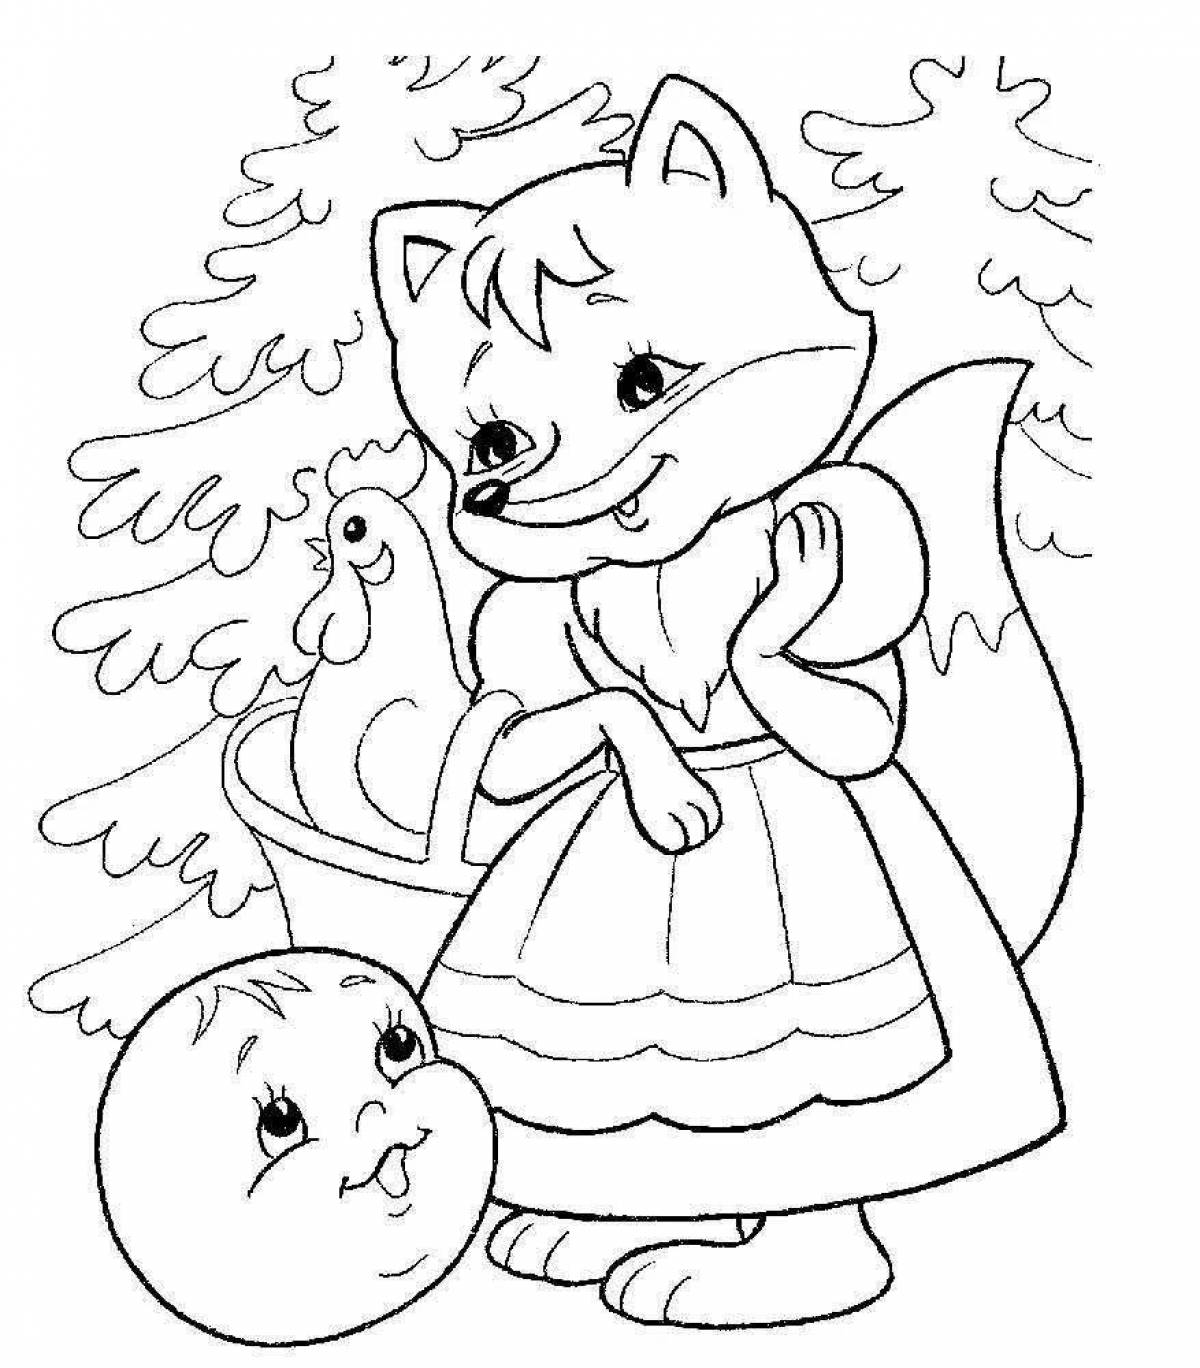 Tempting Bun Heroes Coloring Pages